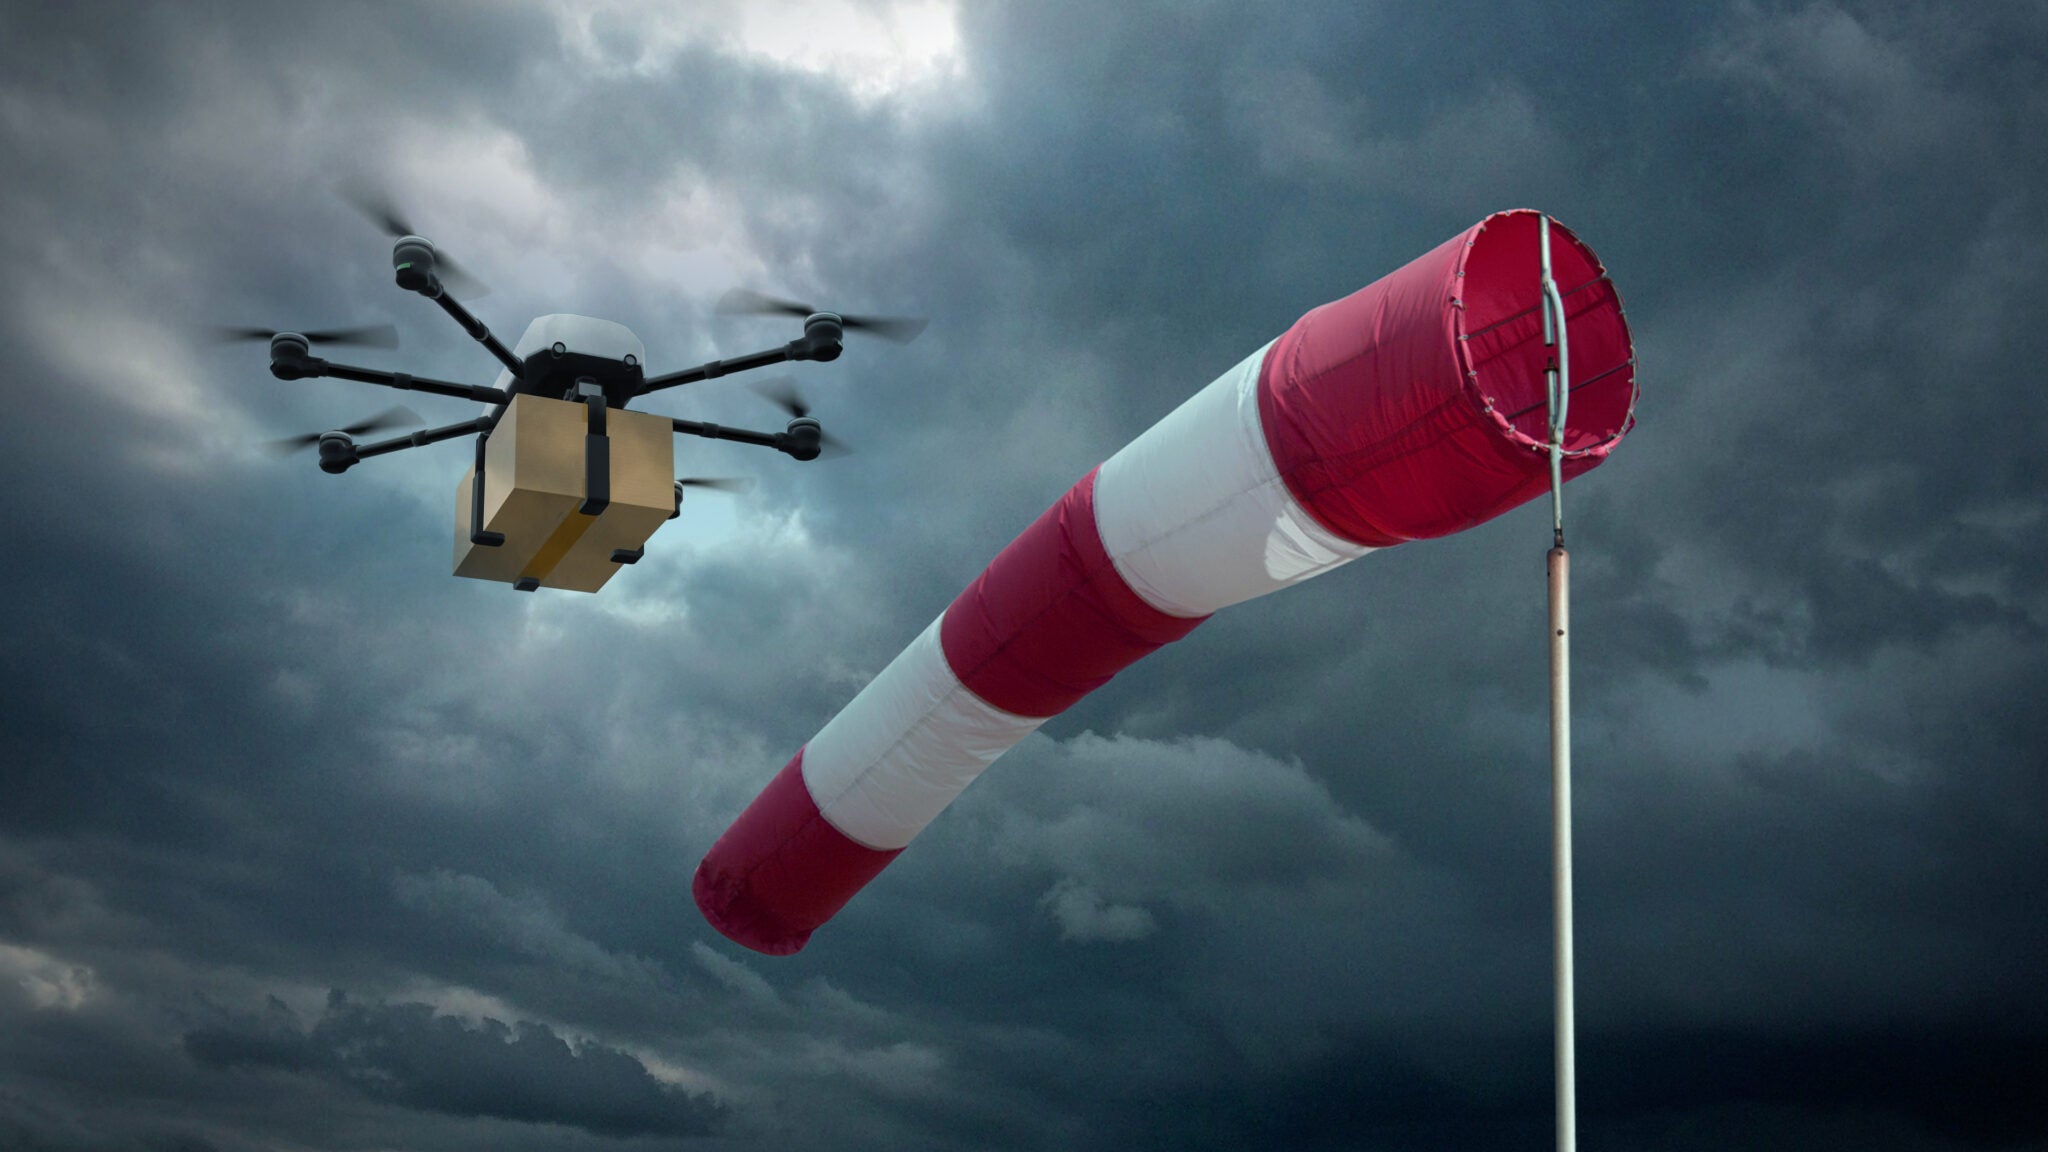 Drones Fly Into Weather Data Deserts. Can They Be Stopped?